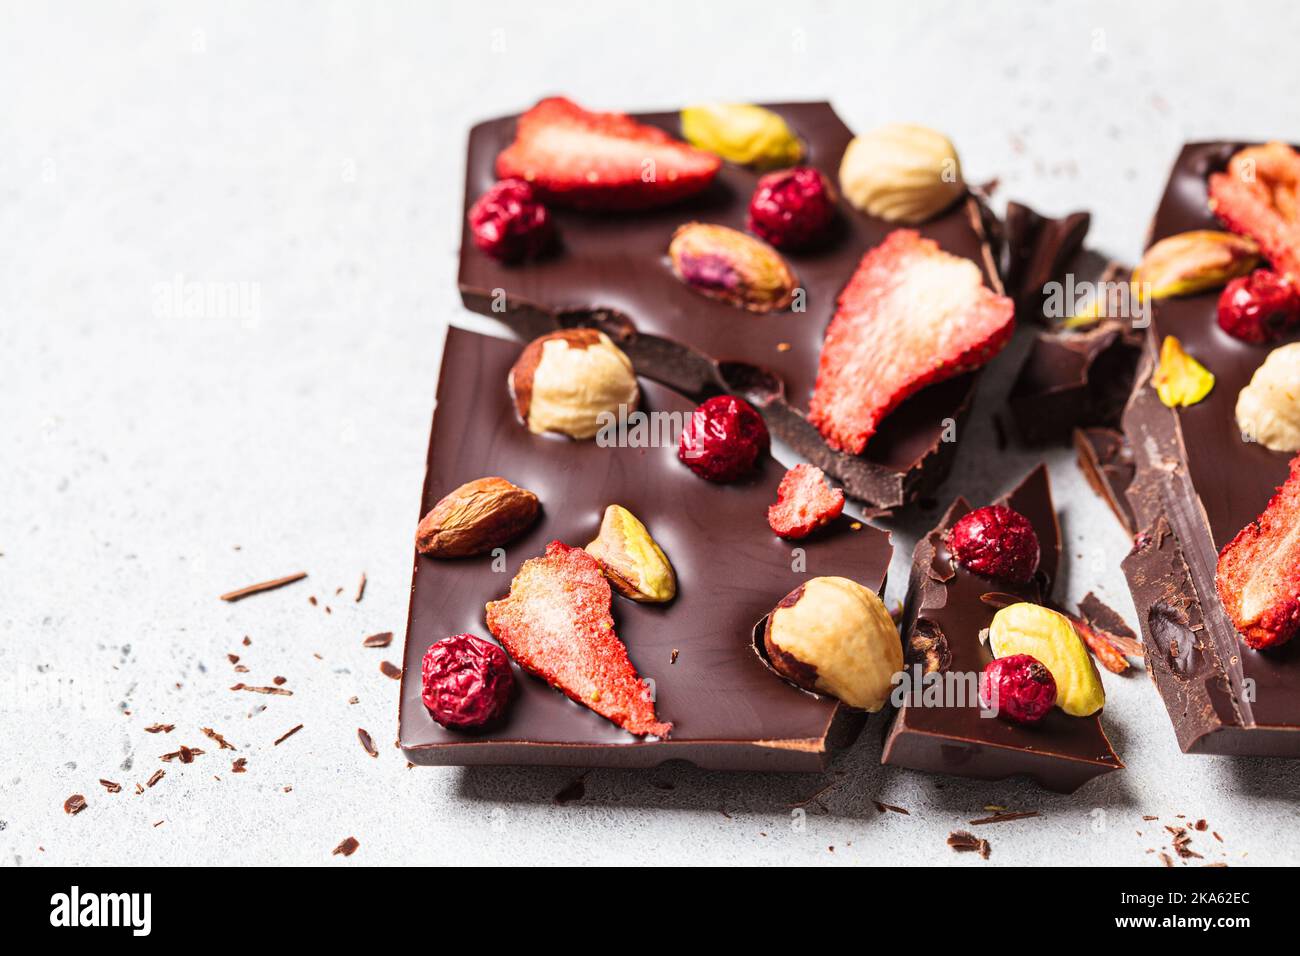 Vegan homemade dark chocolate with berries and nuts on white paper, copy space. Stock Photo